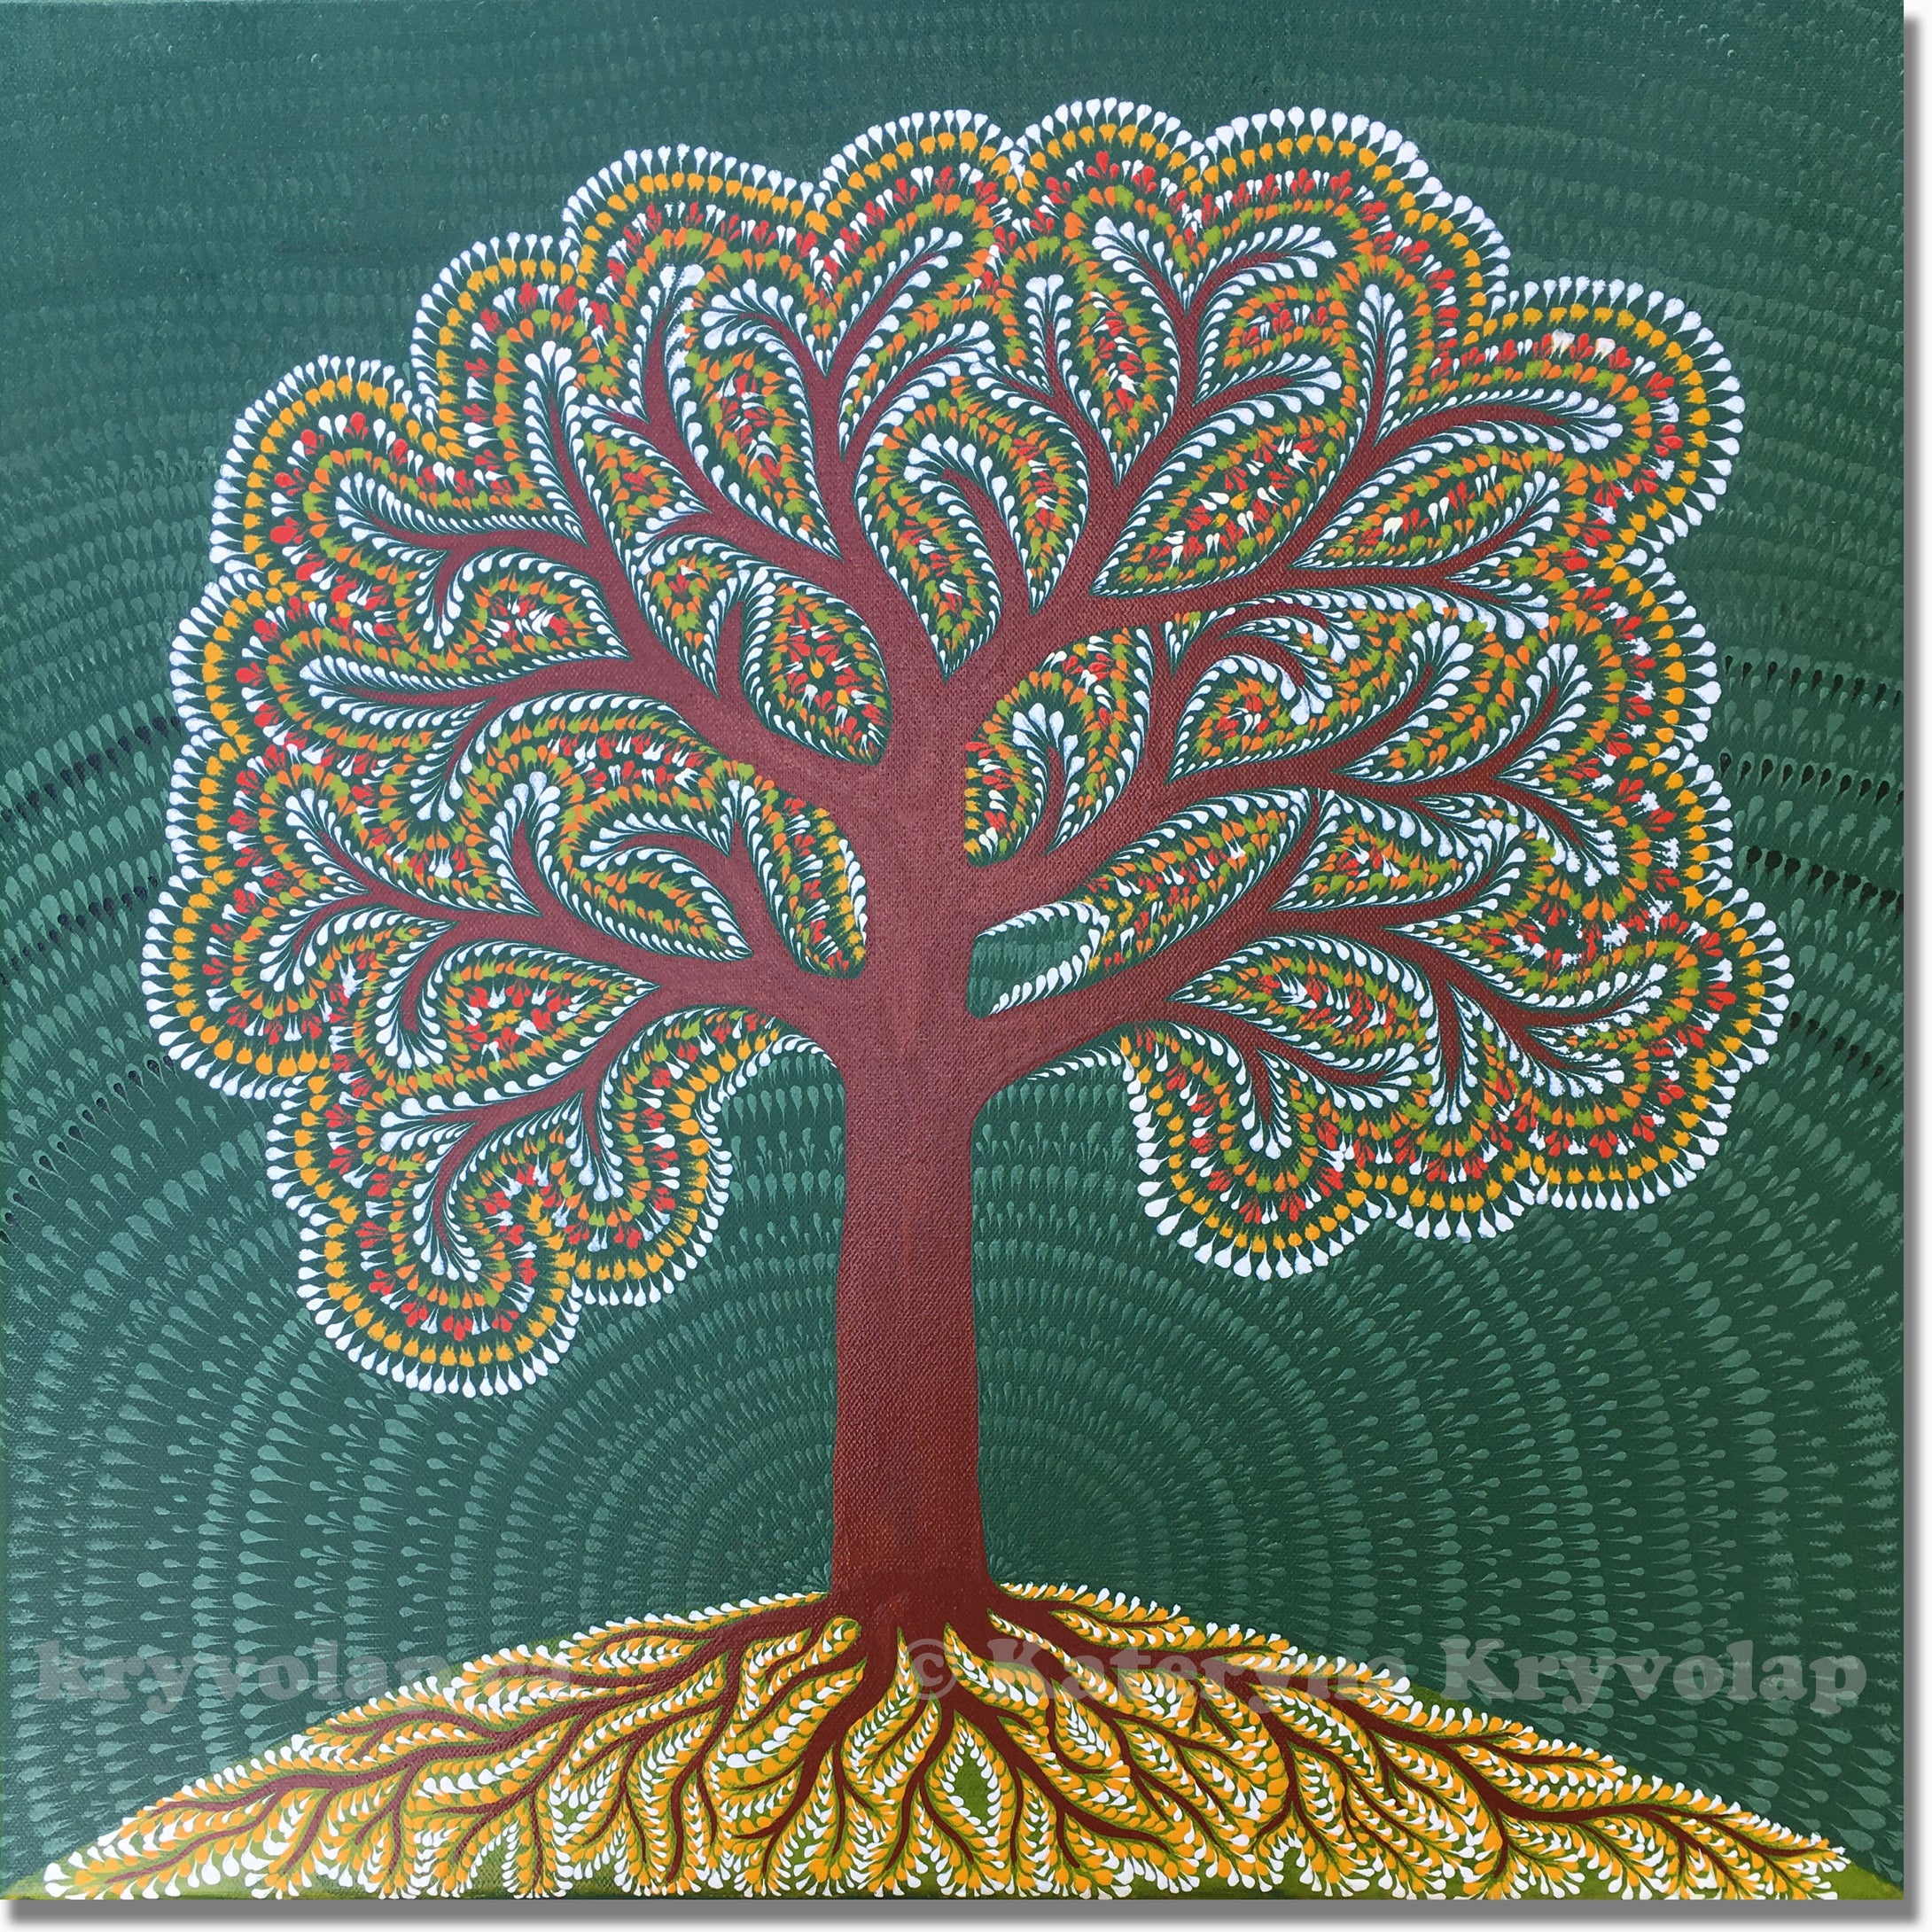 STRONG ROOTS -  20 in x 20 in (50.8 cm x 50.8 cm)